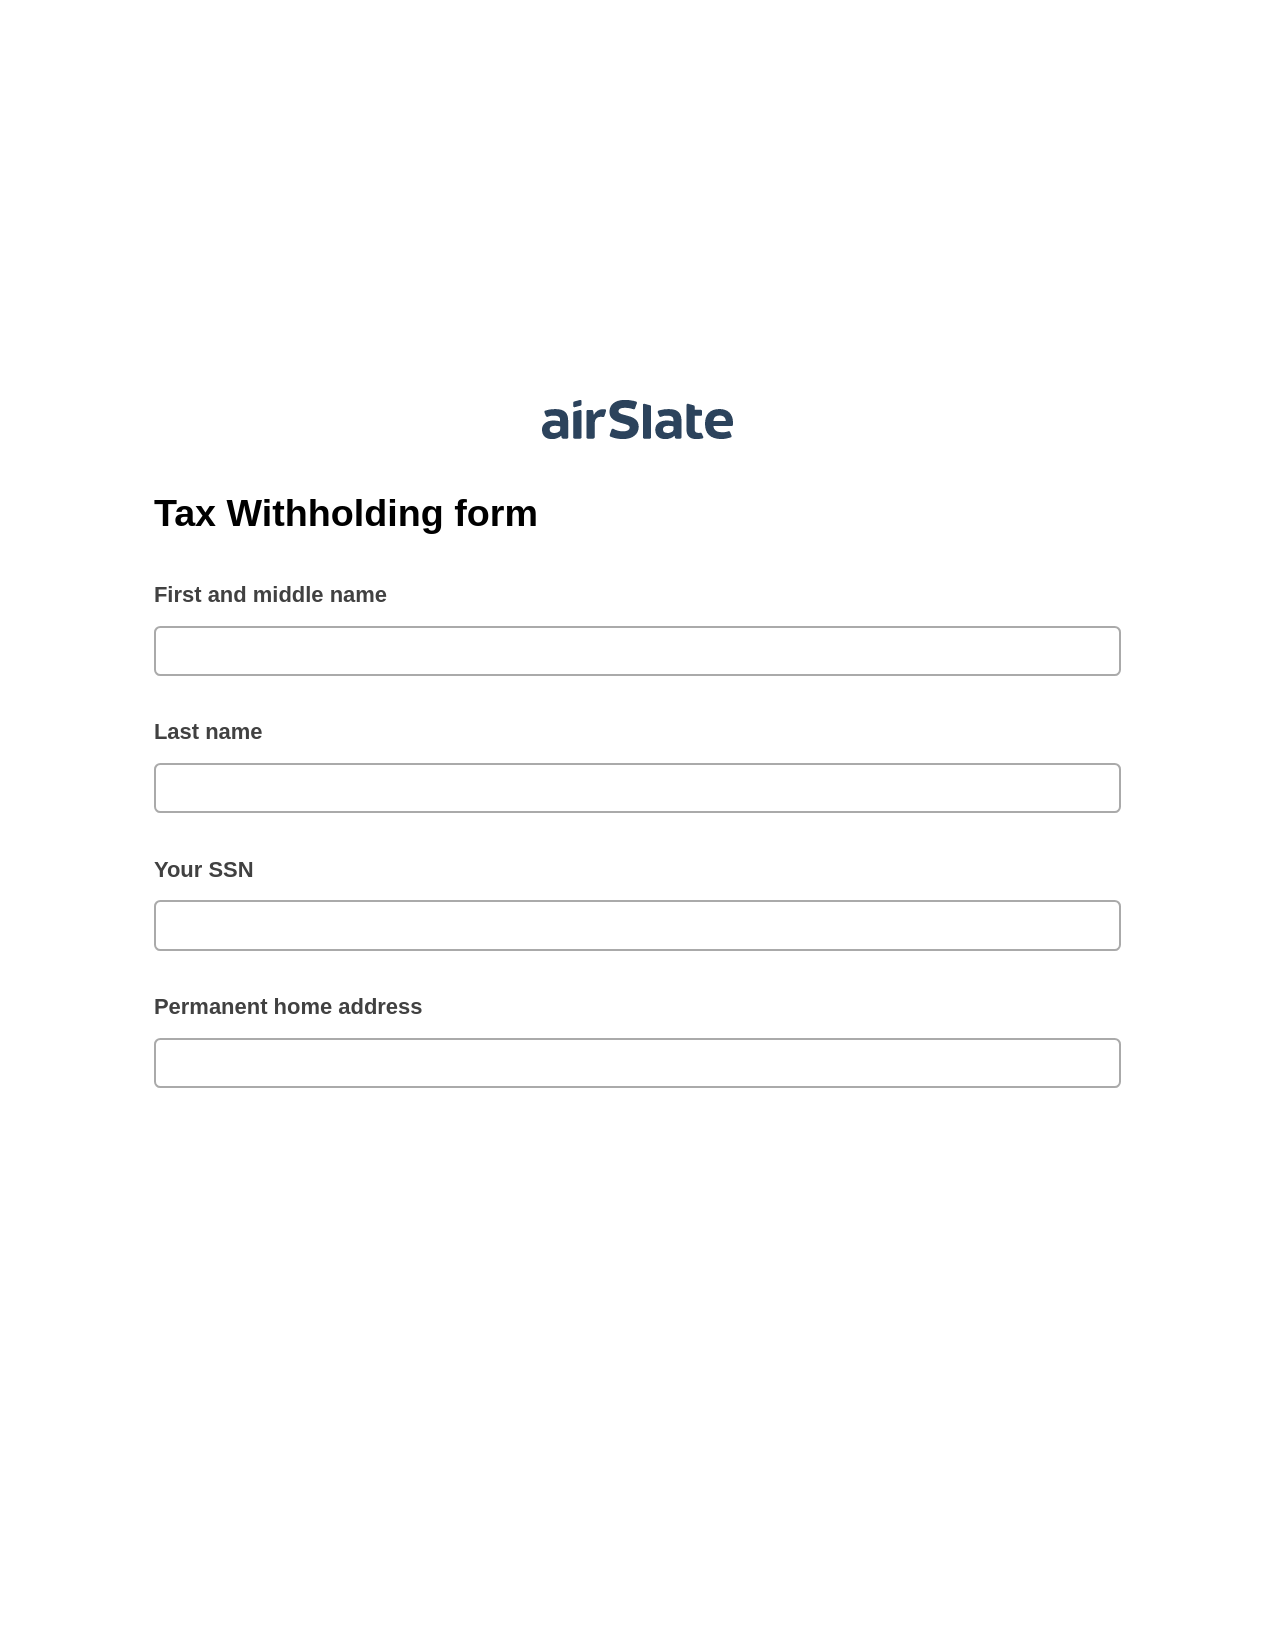 Tax Withholding form Pre-fill from CSV File Bot, Audit Trail Bot, Post-finish Document Bot